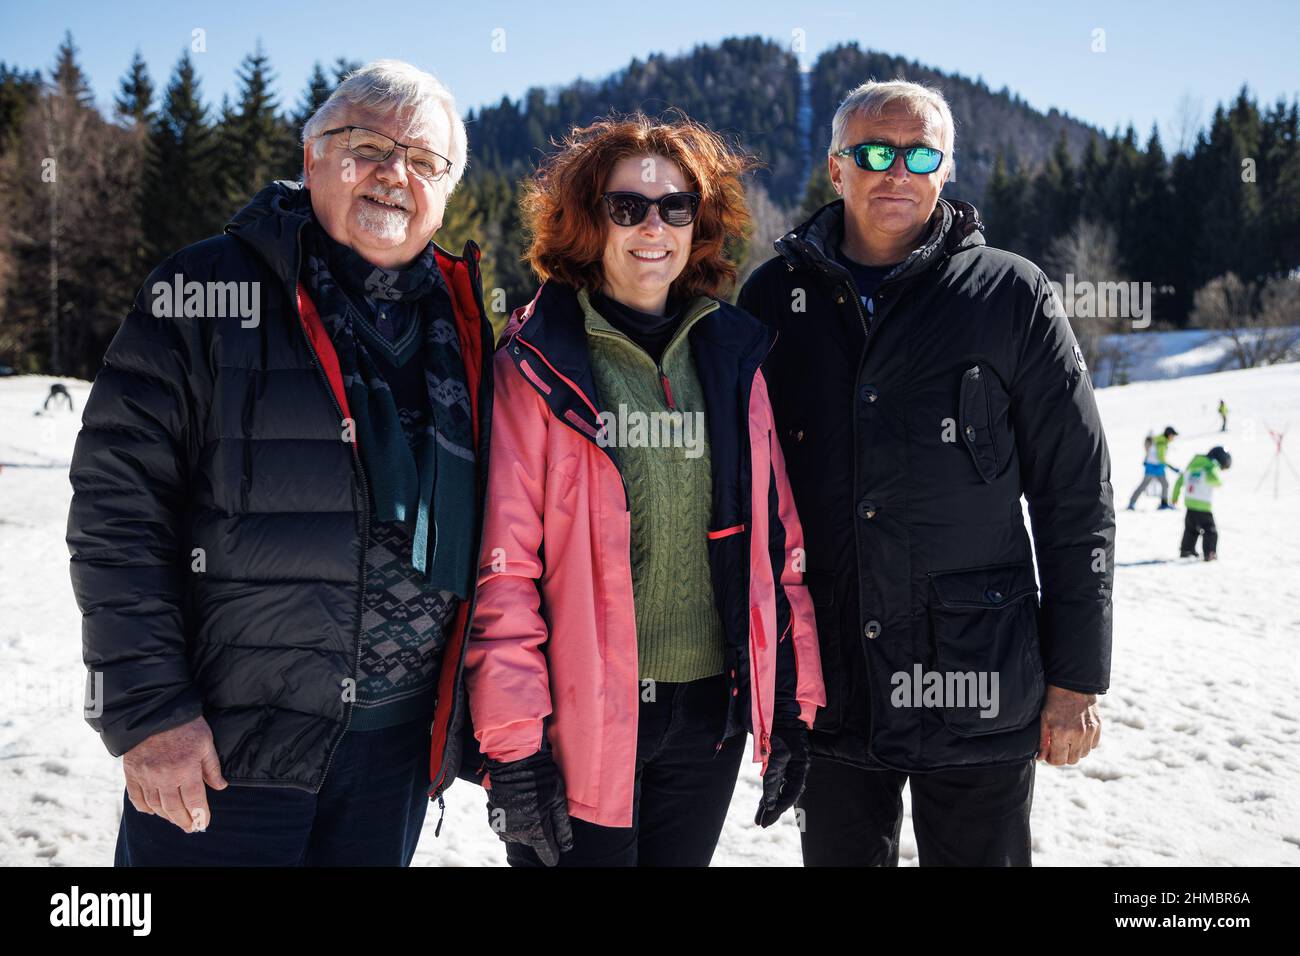 (L-R) The Mayor of Bled Janez Fajfar, Susan K. Falatko, Chargé d'Affaires at the United States Embassy in Ljubljana, and the manager of Zatrnik ski resort Ales Zalar pose for a photo at an event celebrating the 50th anniversary of Apollo 15 astronauts skiing at the Zatrnik ski resort in Slovenia. The crew of Apollo 15 visited Slovenia, then part of Yugoslavia, in 1972 on their European tour. Half a century ago Commander David R. Scott, Command Module Pilot Alfred M. Worden and Lunar Module Pilot James B. Irwin of the NASA's Apollo 15 lunar mission visited Slovenia. Their visit included skiing Stock Photo